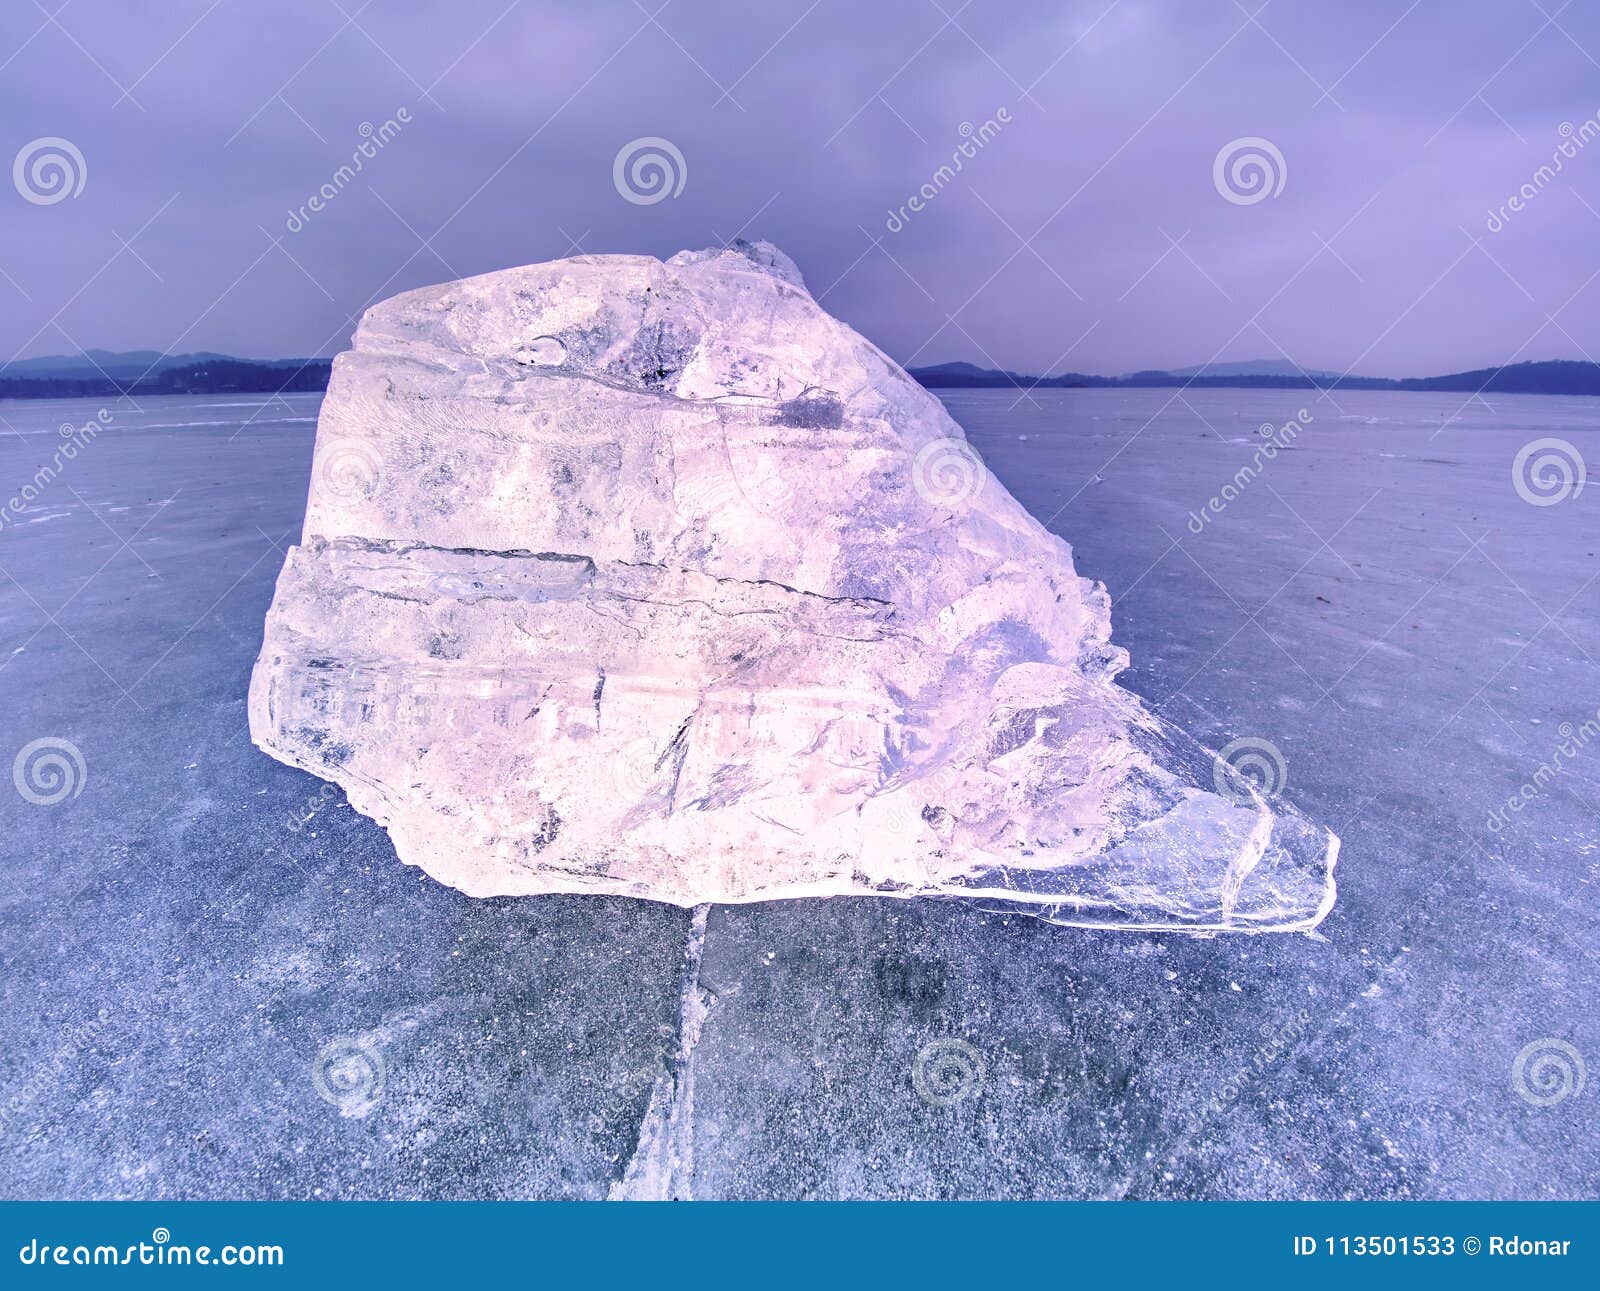 Natural Ice Blocks. Ice Floe Break Due To Wind Against the Shore and ...